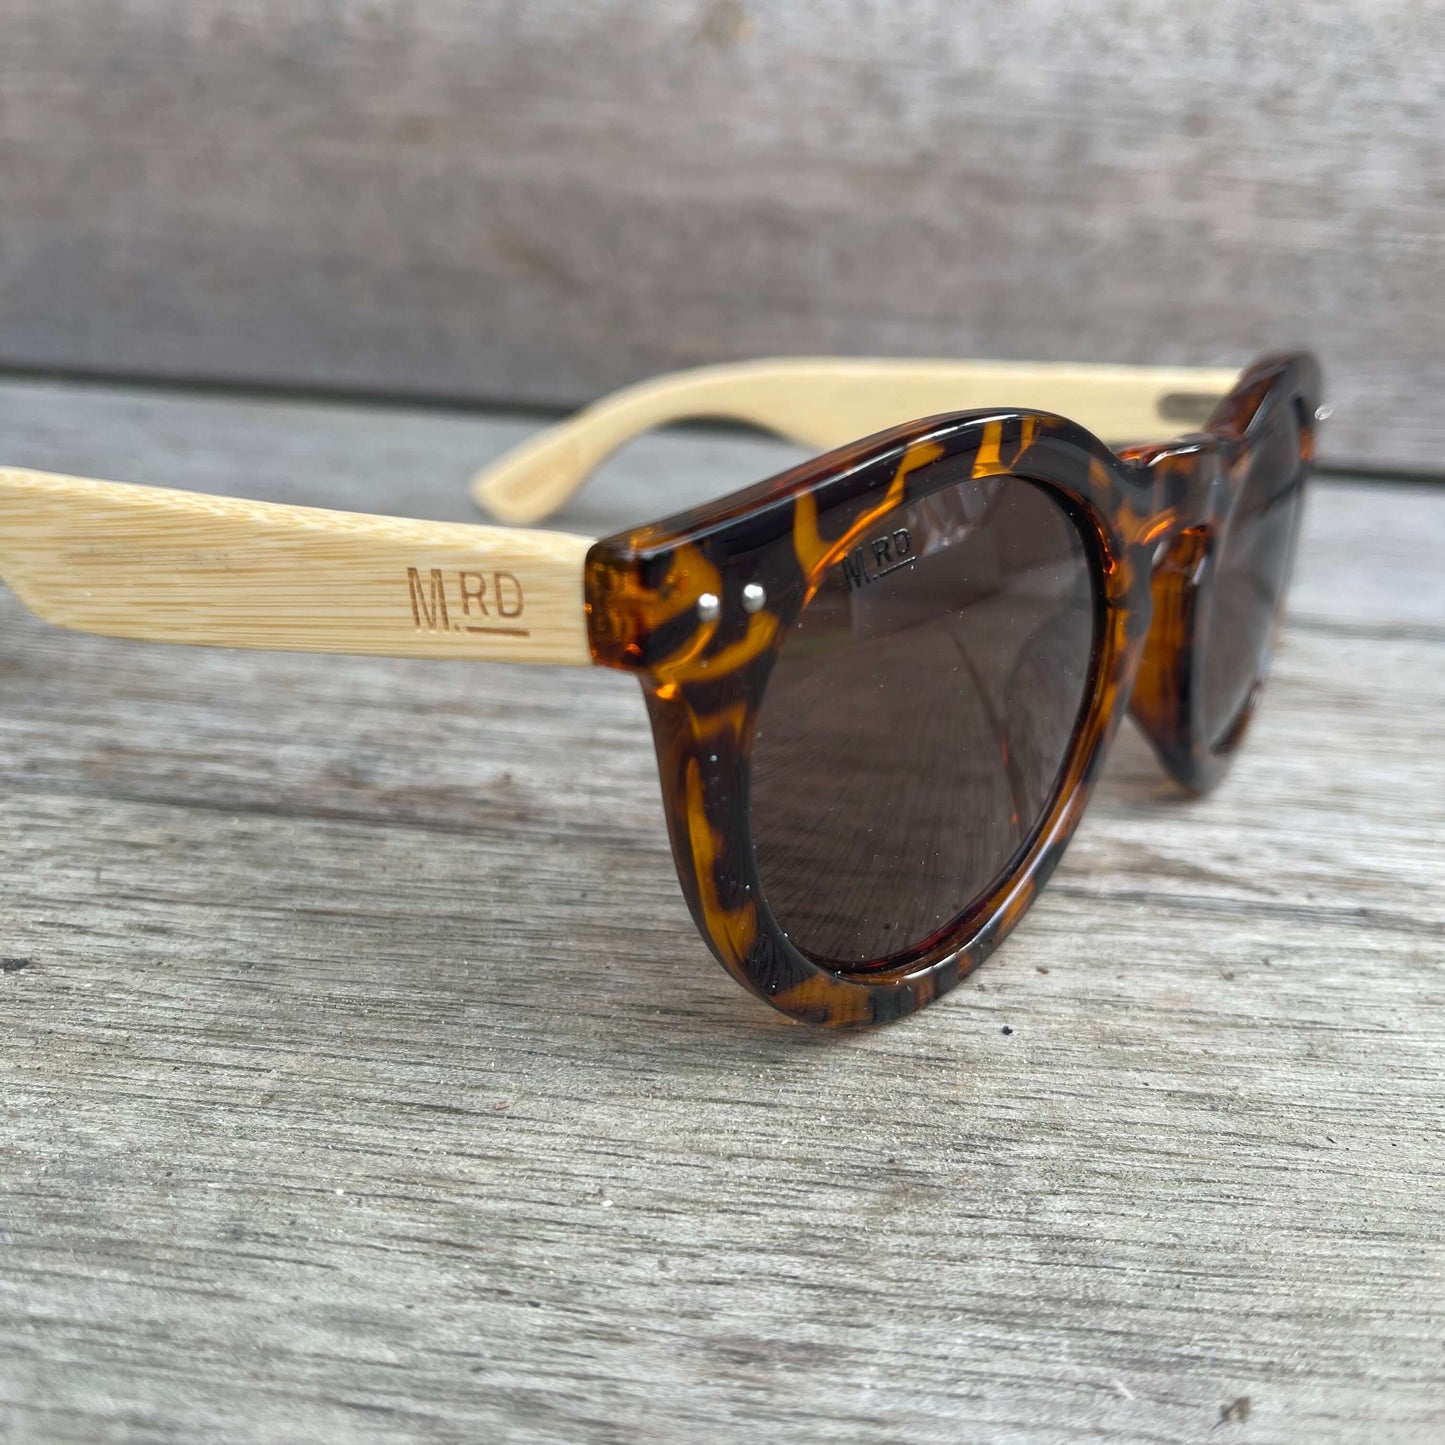 Womens sunglasses with brown tortoiseshell frames and bamboo arms in a Grace Kelly style.